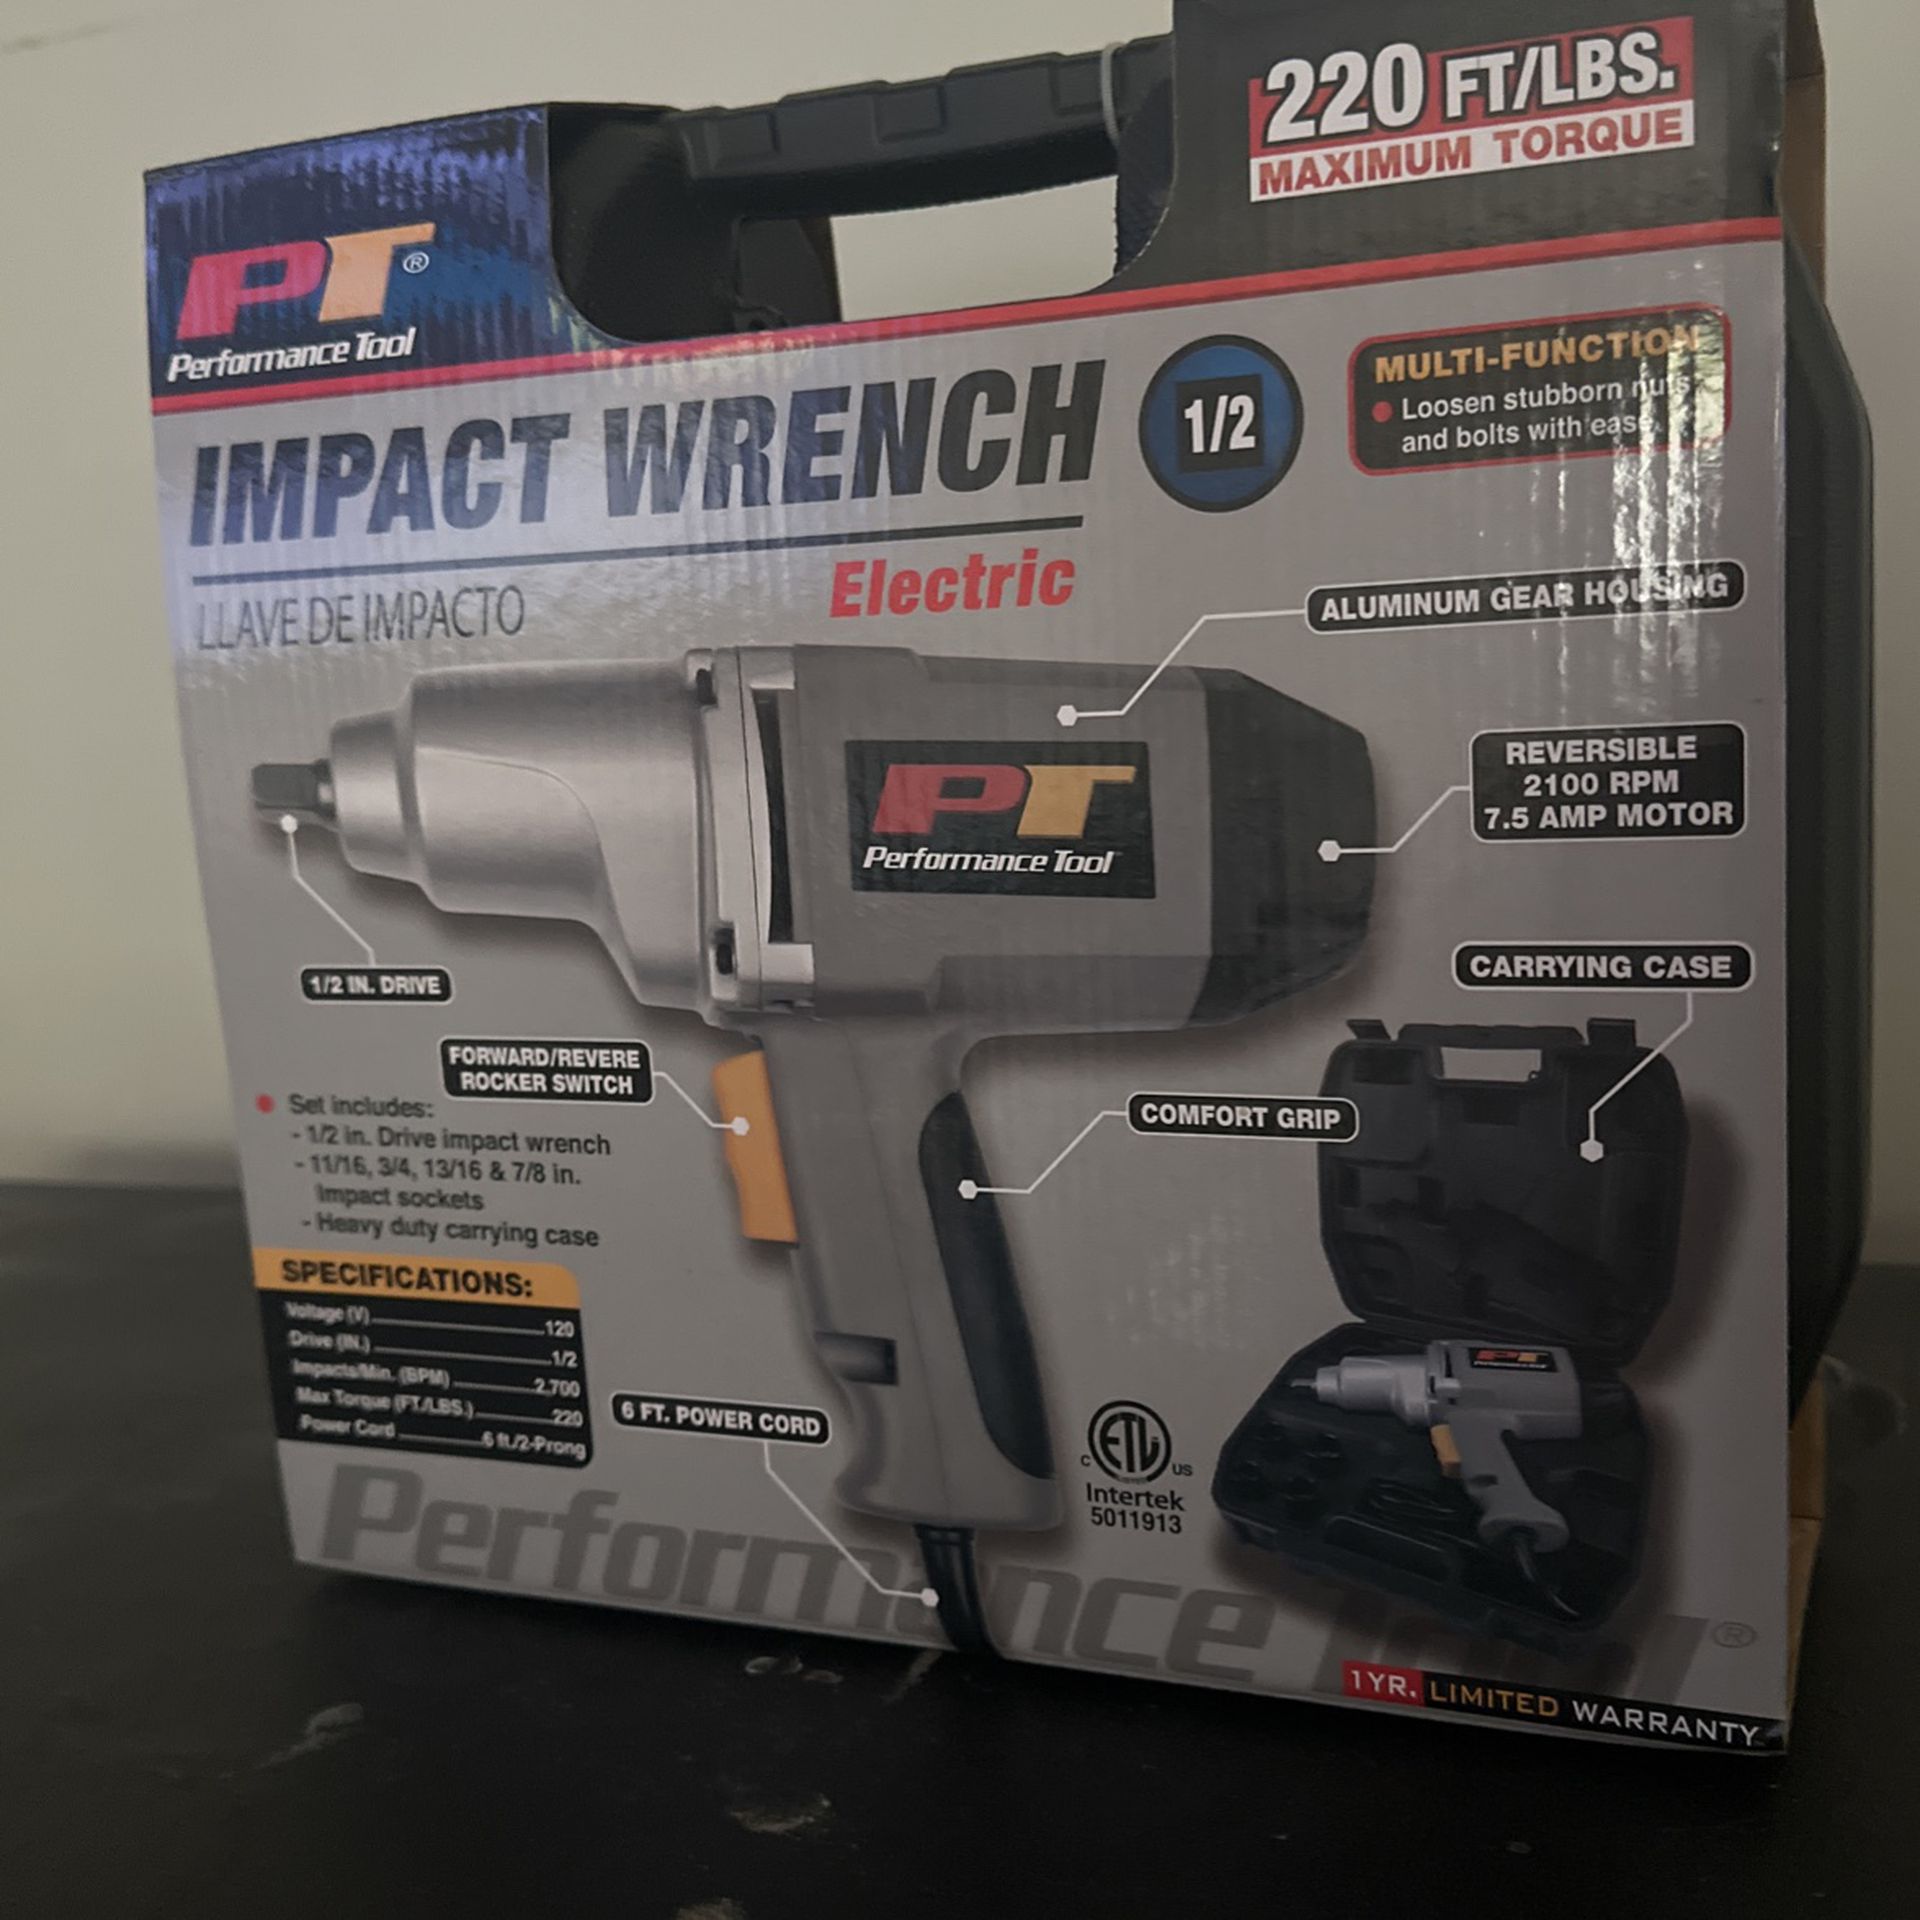 Performance Tool Impact Wrench